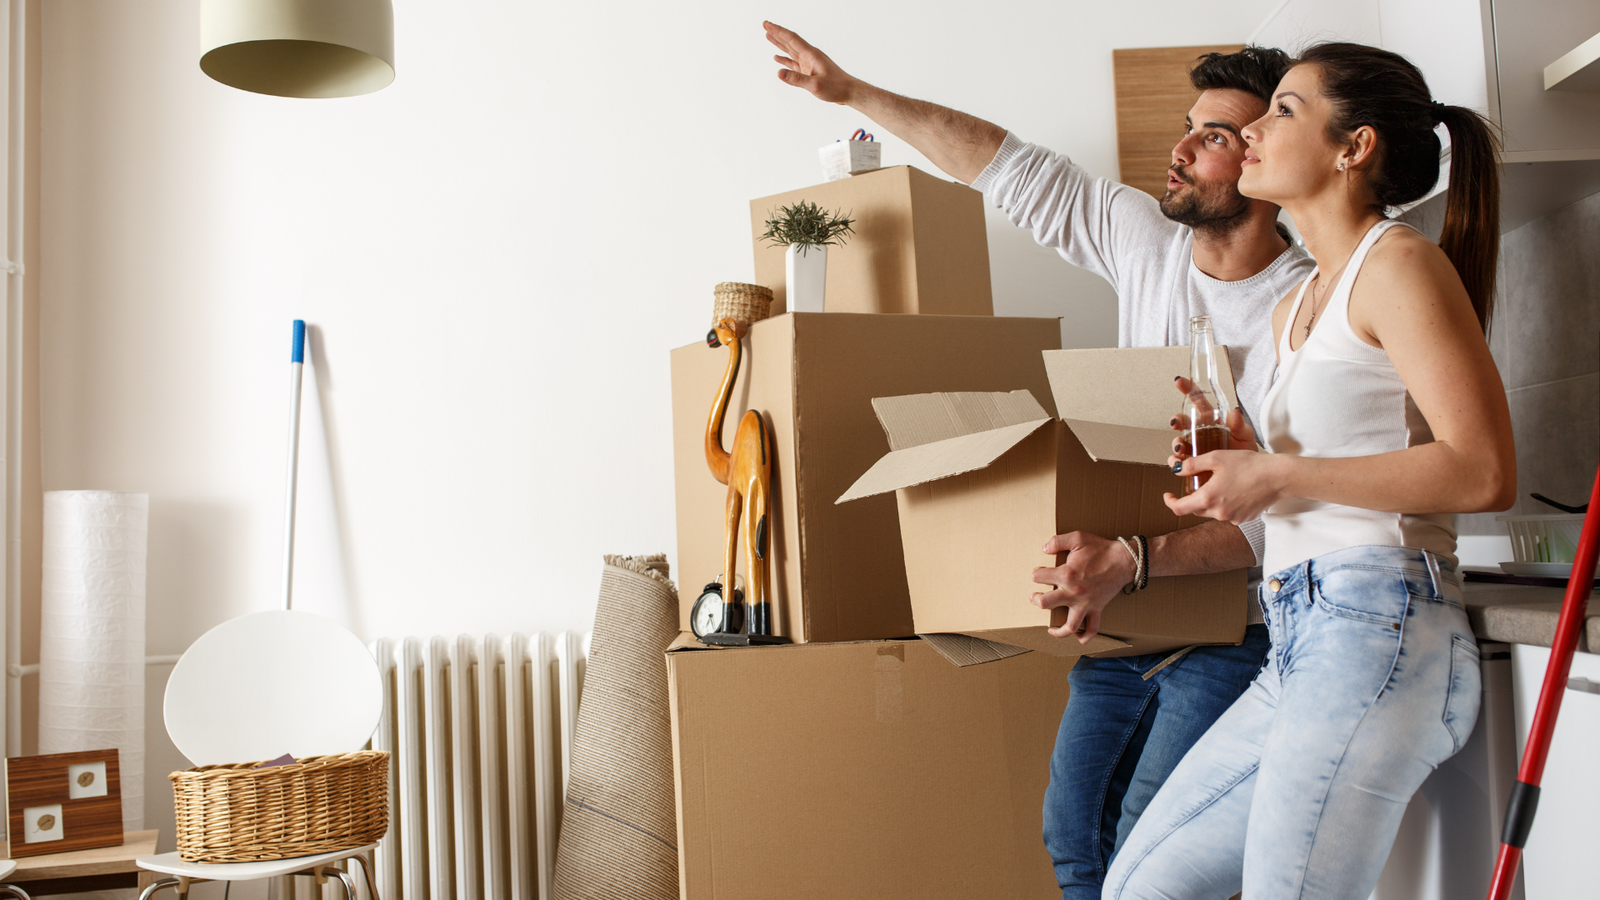 Top 5 Packers and Movers in Bangalore